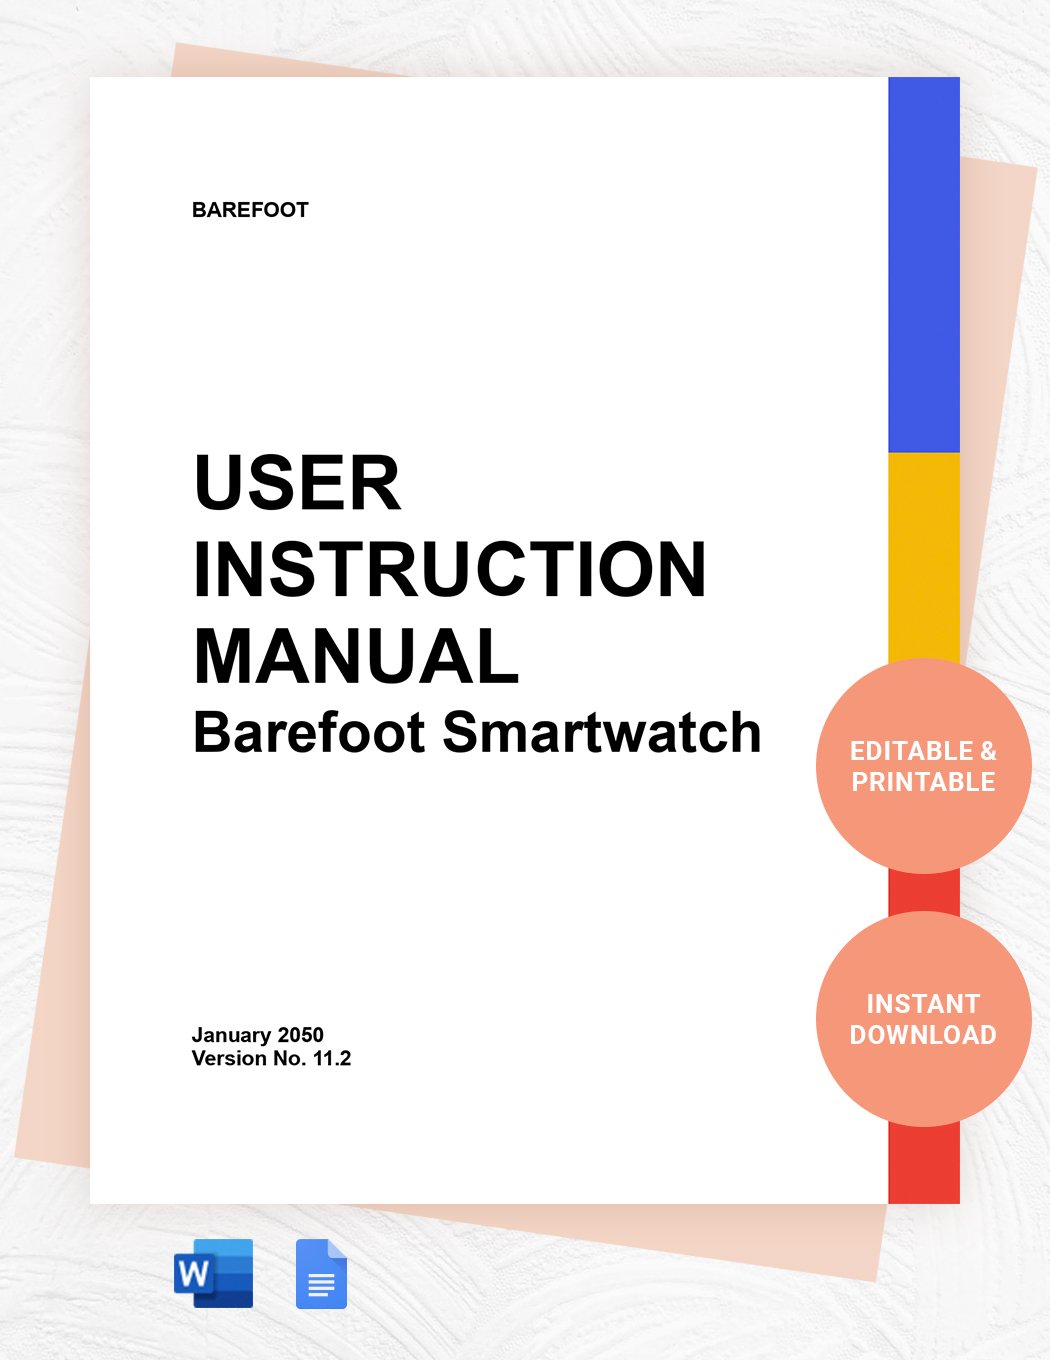 User Instruction Manual Template